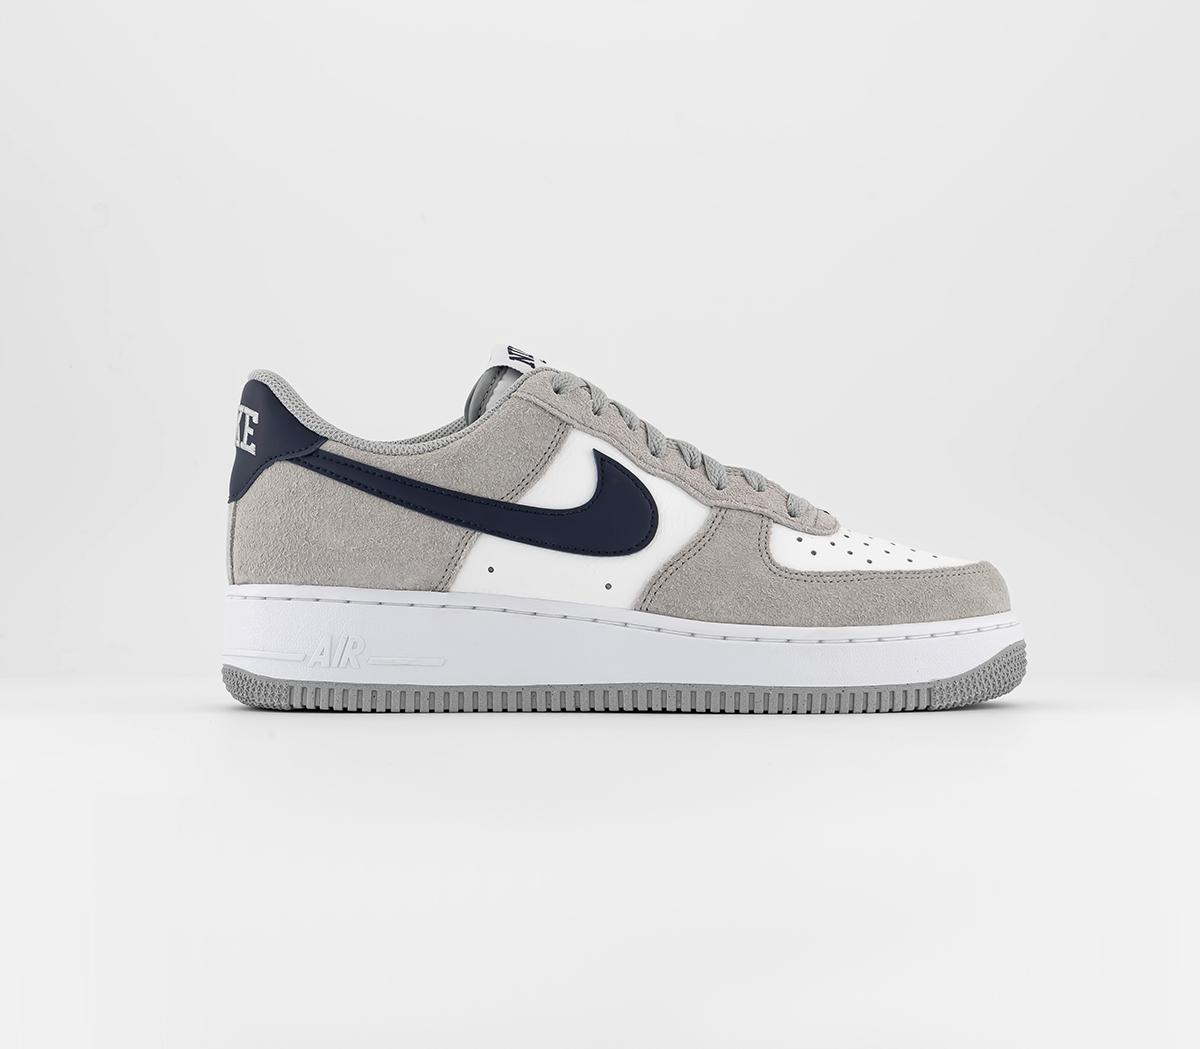 Facet George Eliot vrede Nike Air Force 1 07 Trainers Lt Smoke Grey Midnight Navy Summit - Men's  Trainers